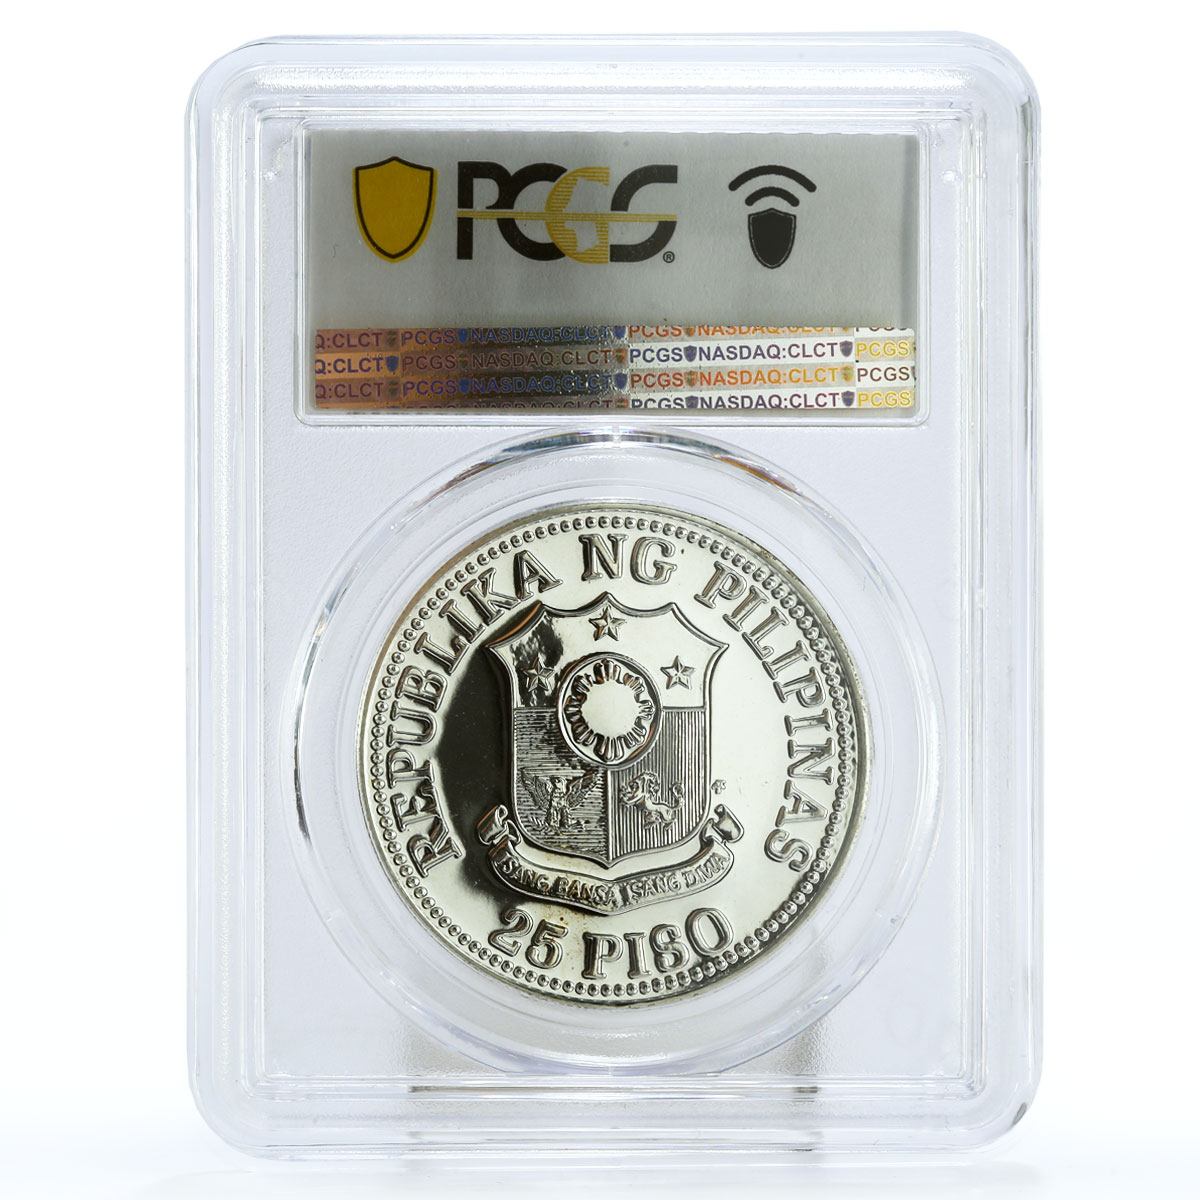 Philippines 25 piso FAO World Food Day Fish Fruits PL66 PCGS silver coin 1981